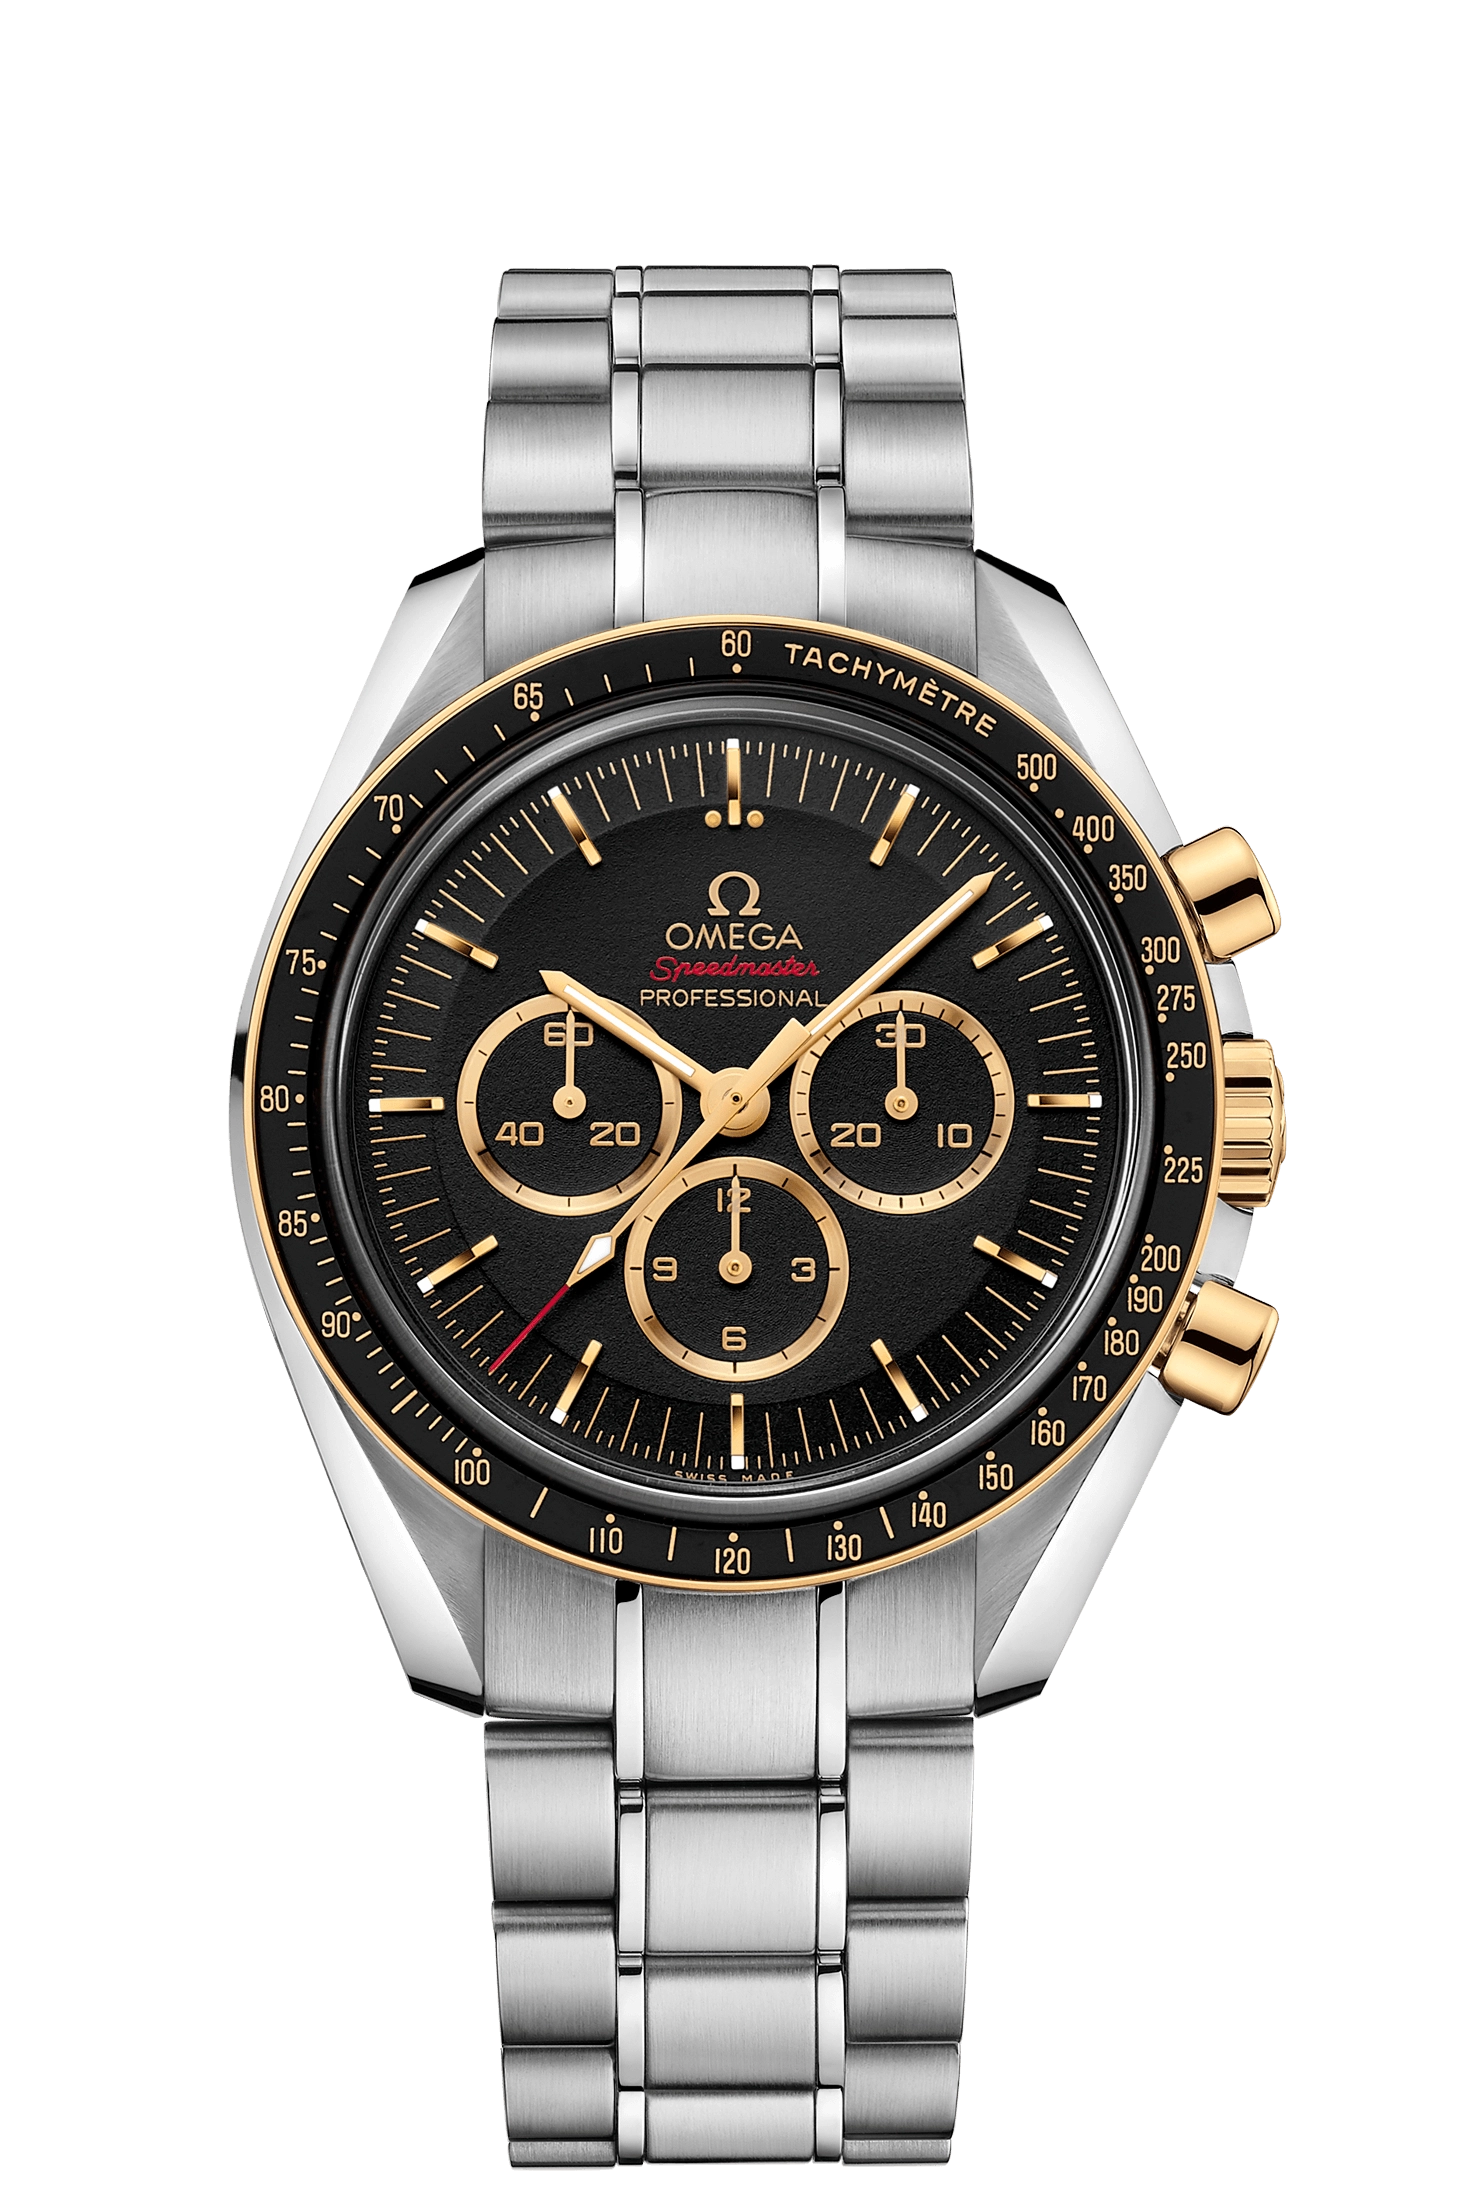 omega-speedmaster-anniversary-series-chronograph-42-mm-52220423001001-1-product-zoom-27449a-min